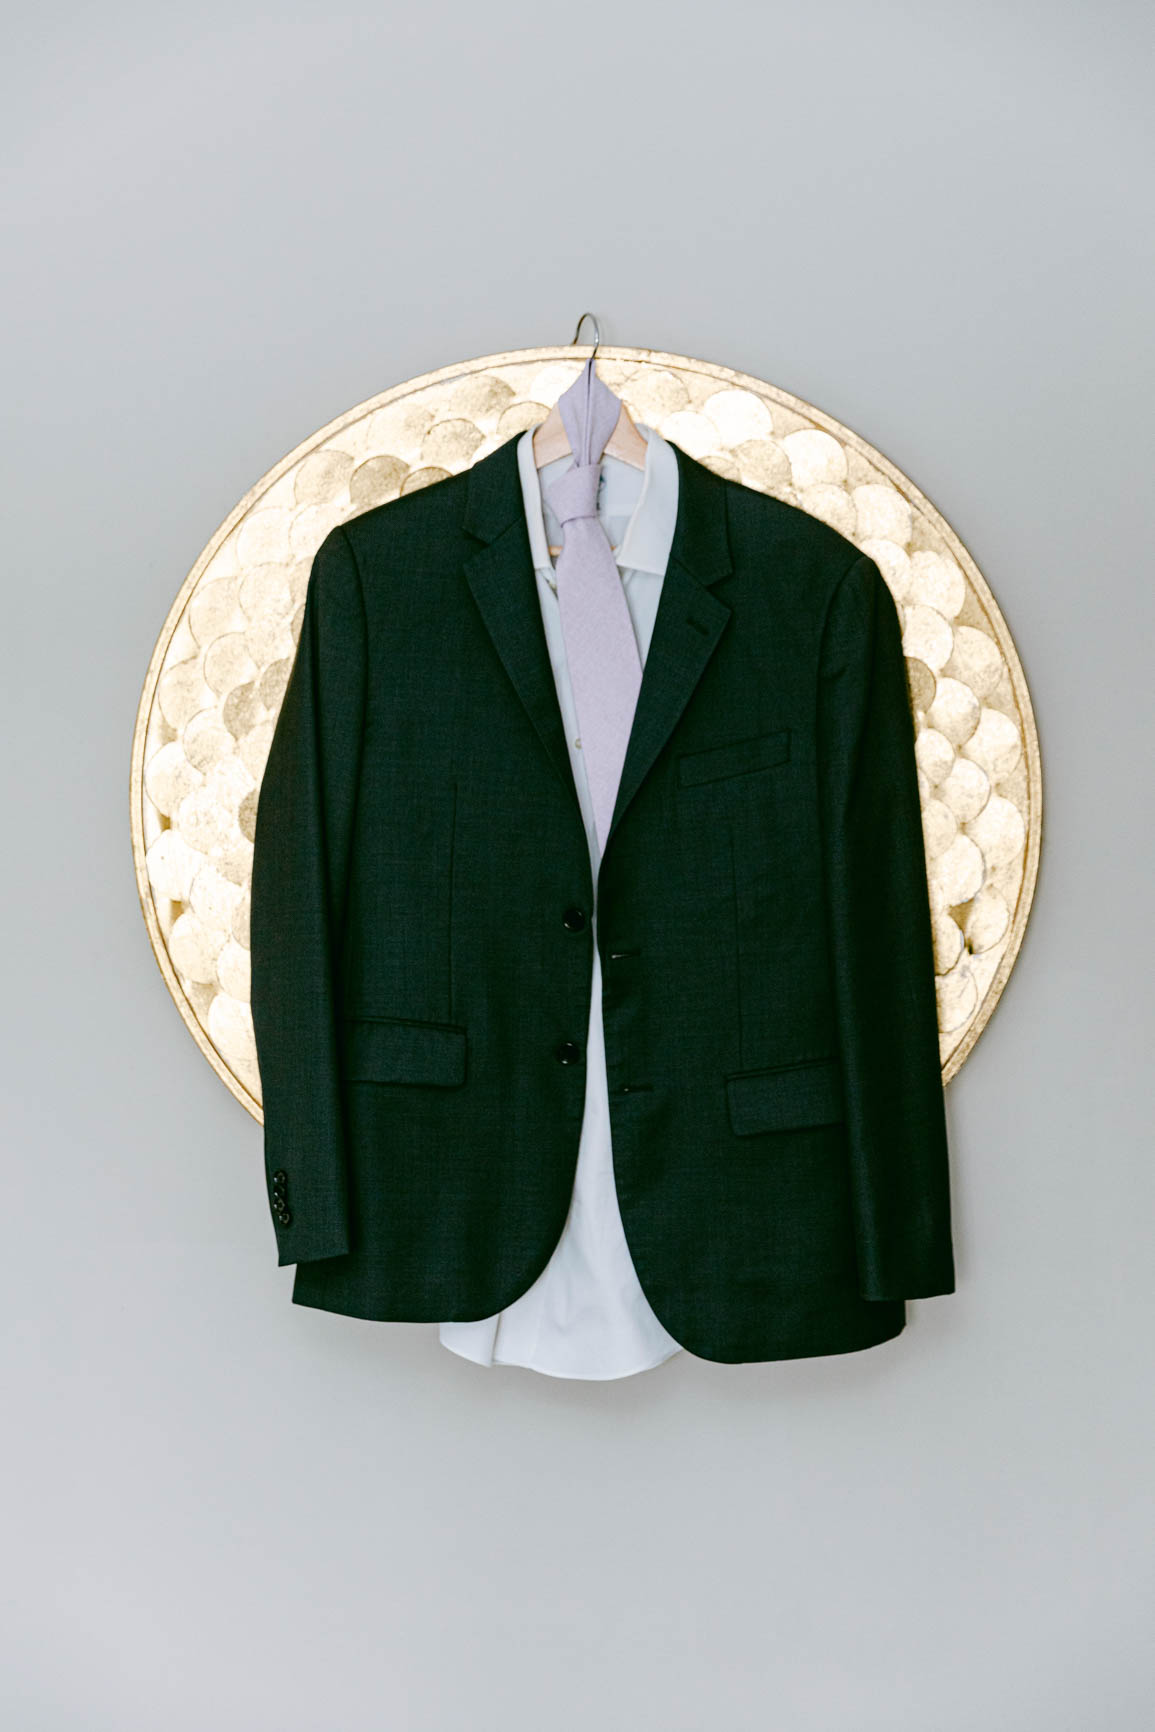 groom jacket from lake house elopement shot by Nhieu Tang Photography | nhieutang.com